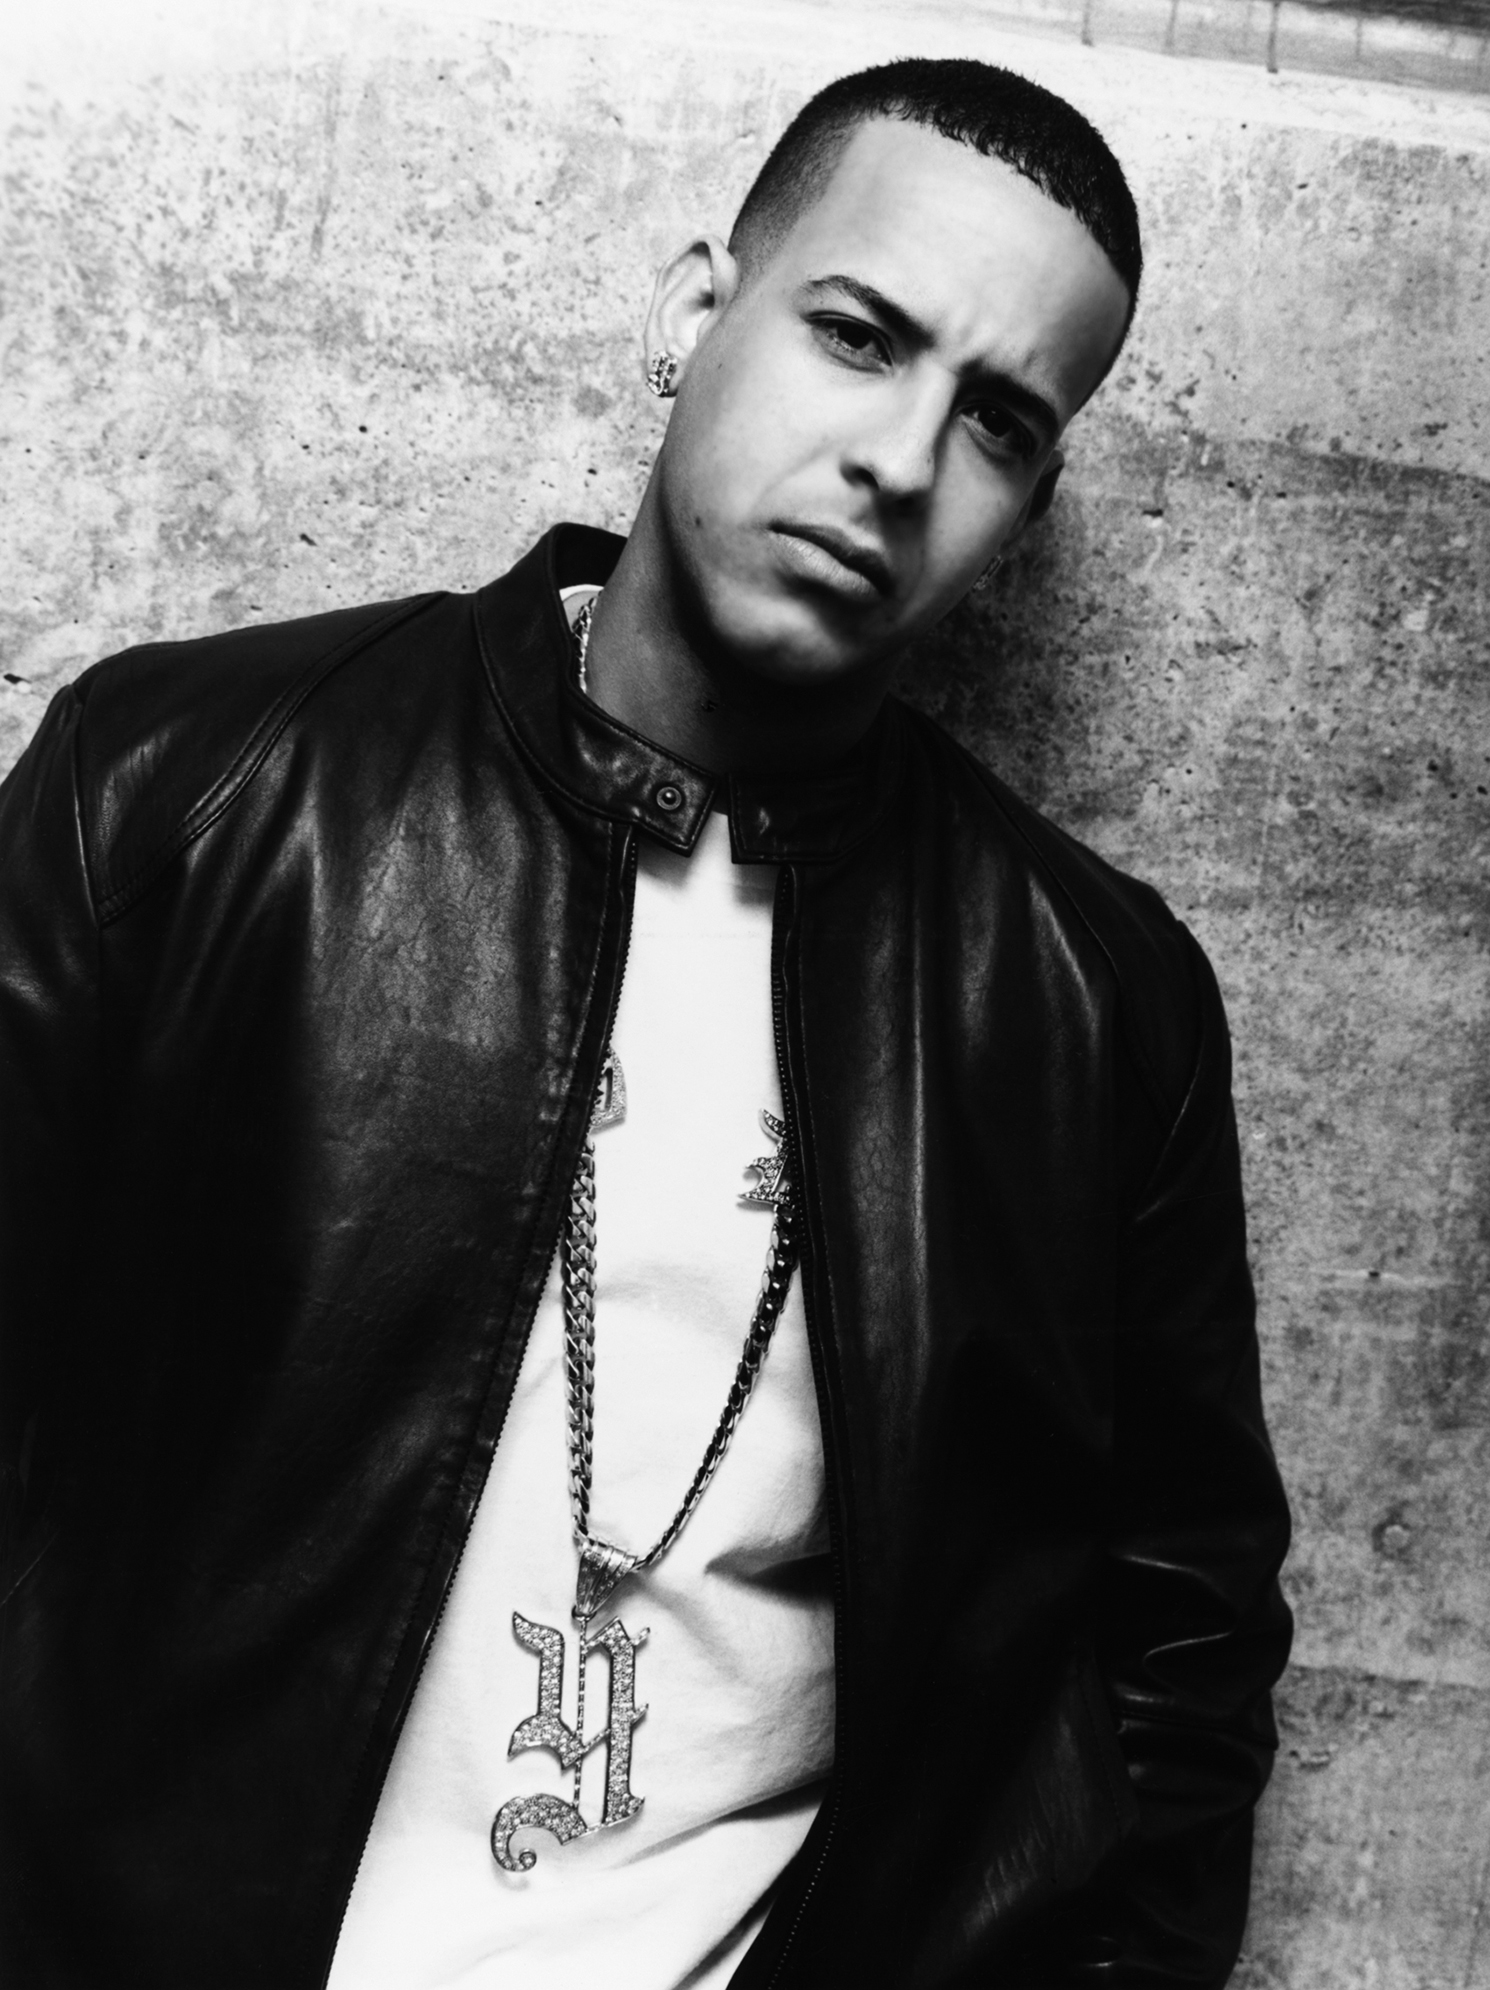 Daddy Yankee Backgrounds, Compatible - PC, Mobile, Gadgets| 1490x1990 px